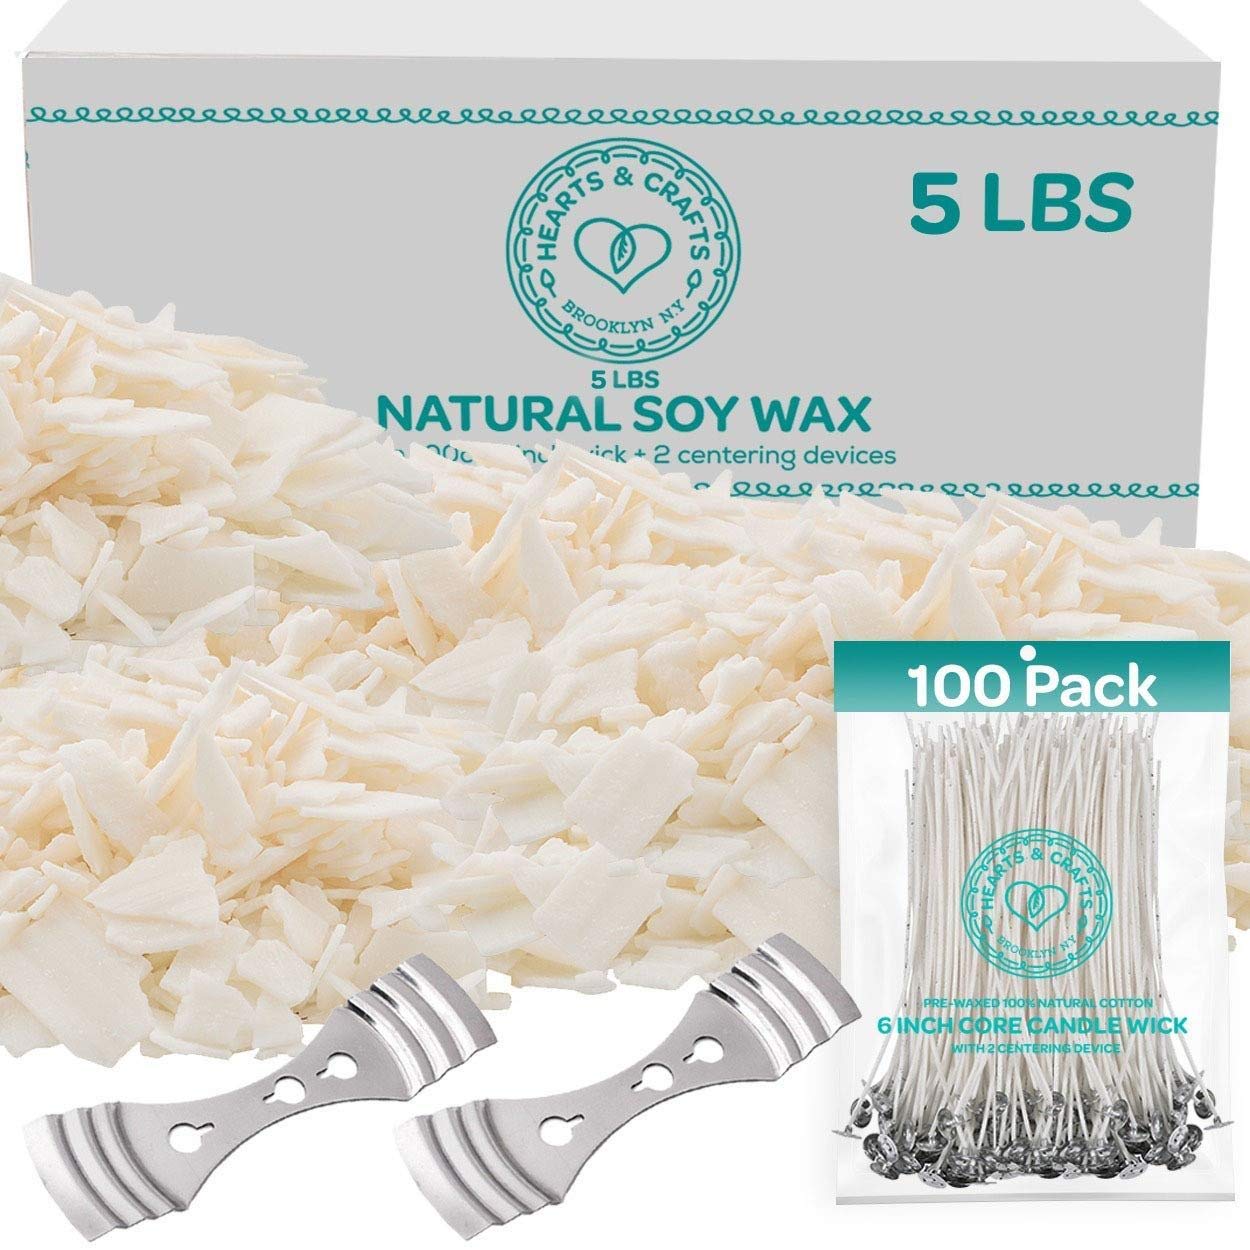 Hearts & Crafts Natural Soy Wax for Candle Making - 5lbs Natural Soy Wax - 100 6-Inch Pre-Waxed Candle Wicks, 2 Metal Centering Devices, 5lbs Soy Wax Flakes - Candle Wax for Candle Making Wax Supplies  - Like New